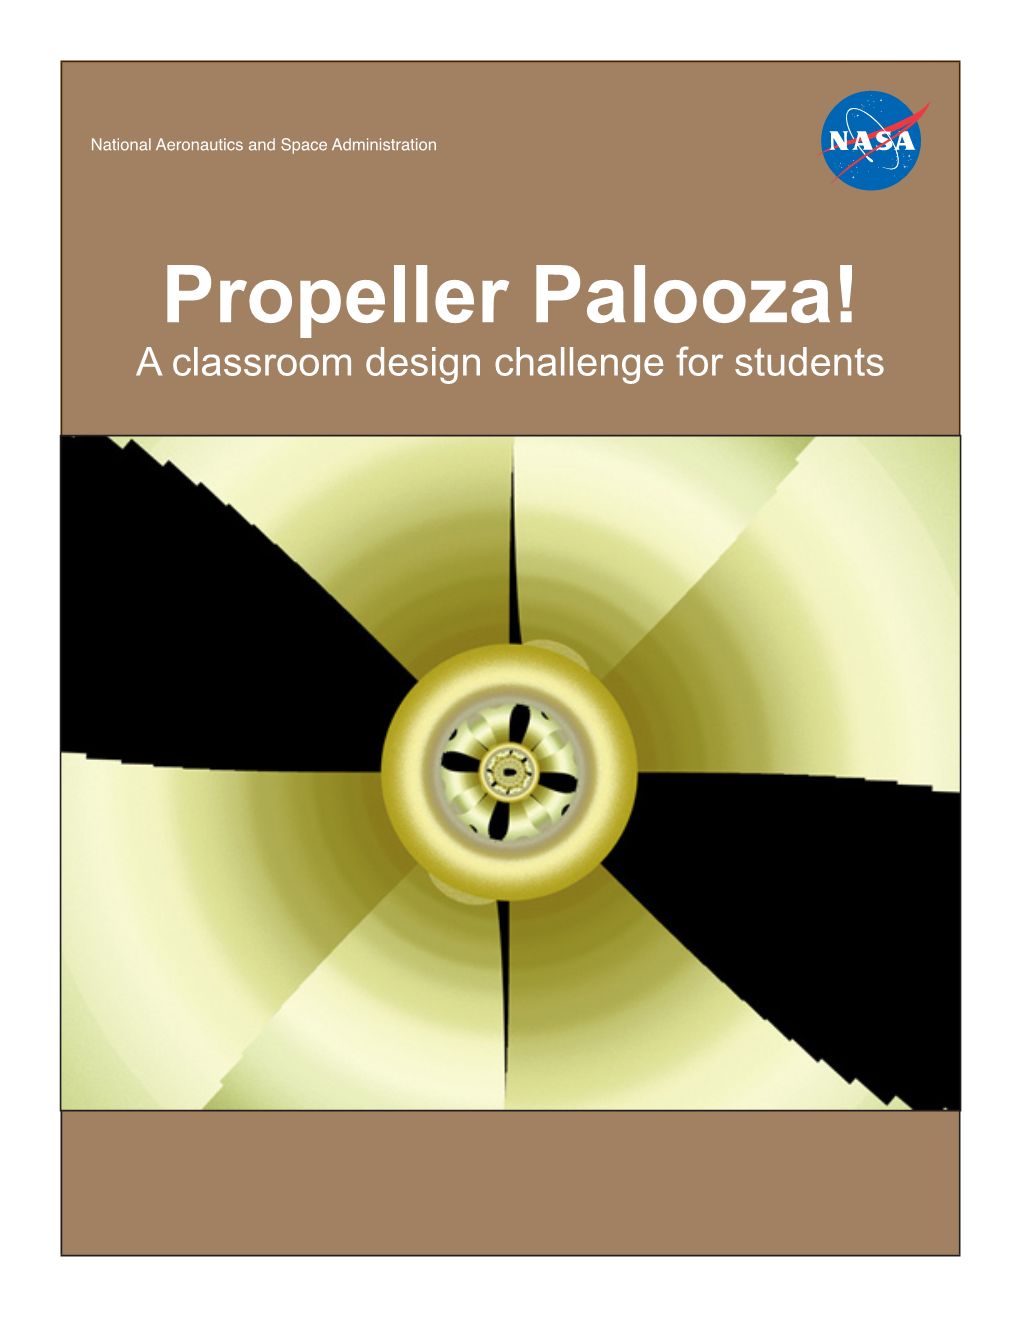 Propeller Palooza! a Classroom Design Challenge for Students National Aeronautics and Space Administration